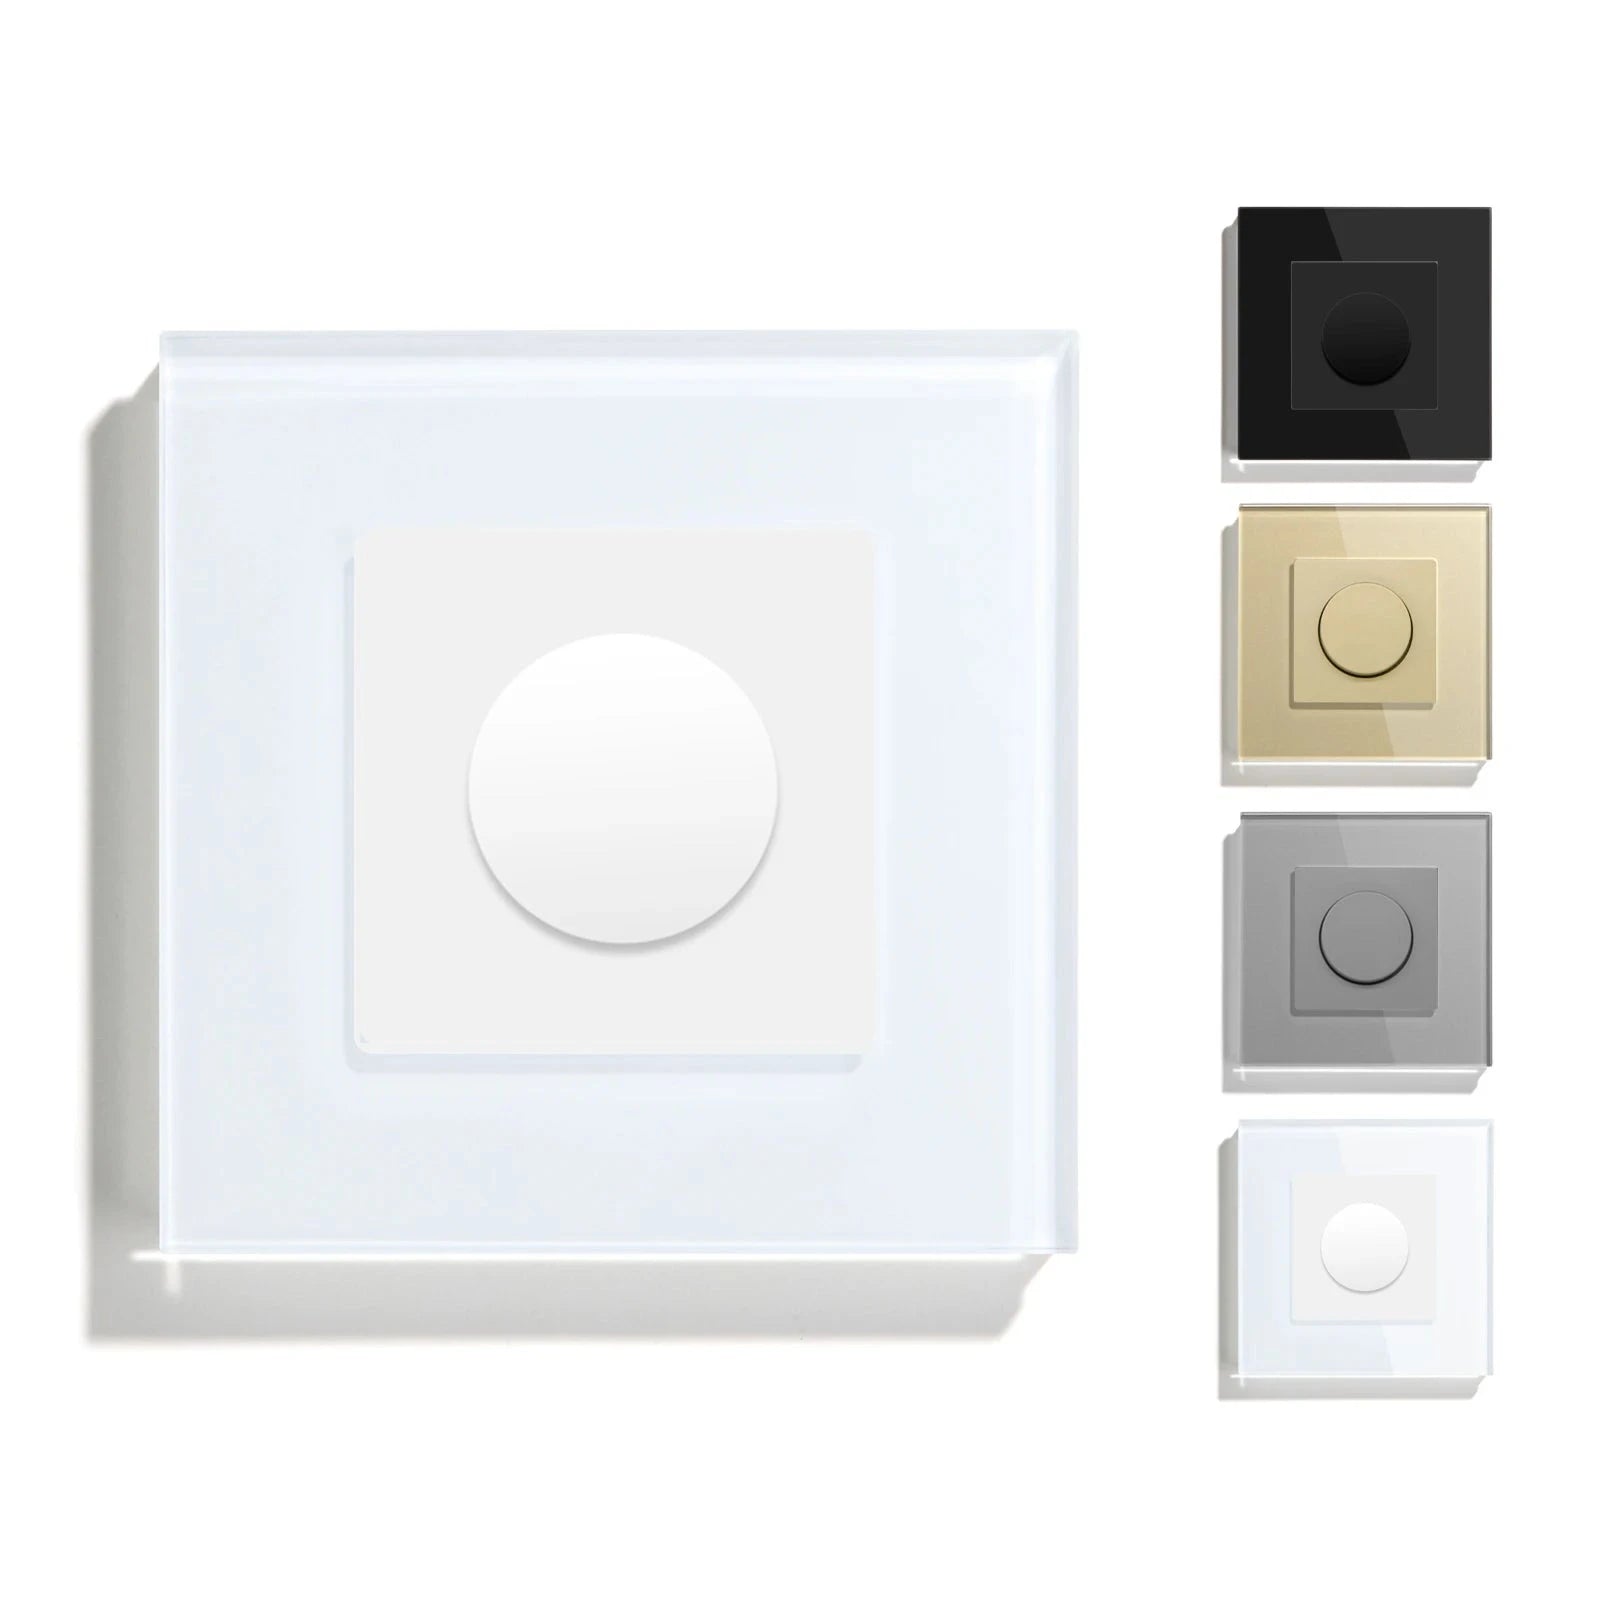 Dimmer Light Switch Adjustable Rotary Knob Crystal Glass Mechanical LED Dimmable Brightness Memory Wall Mounted Switches